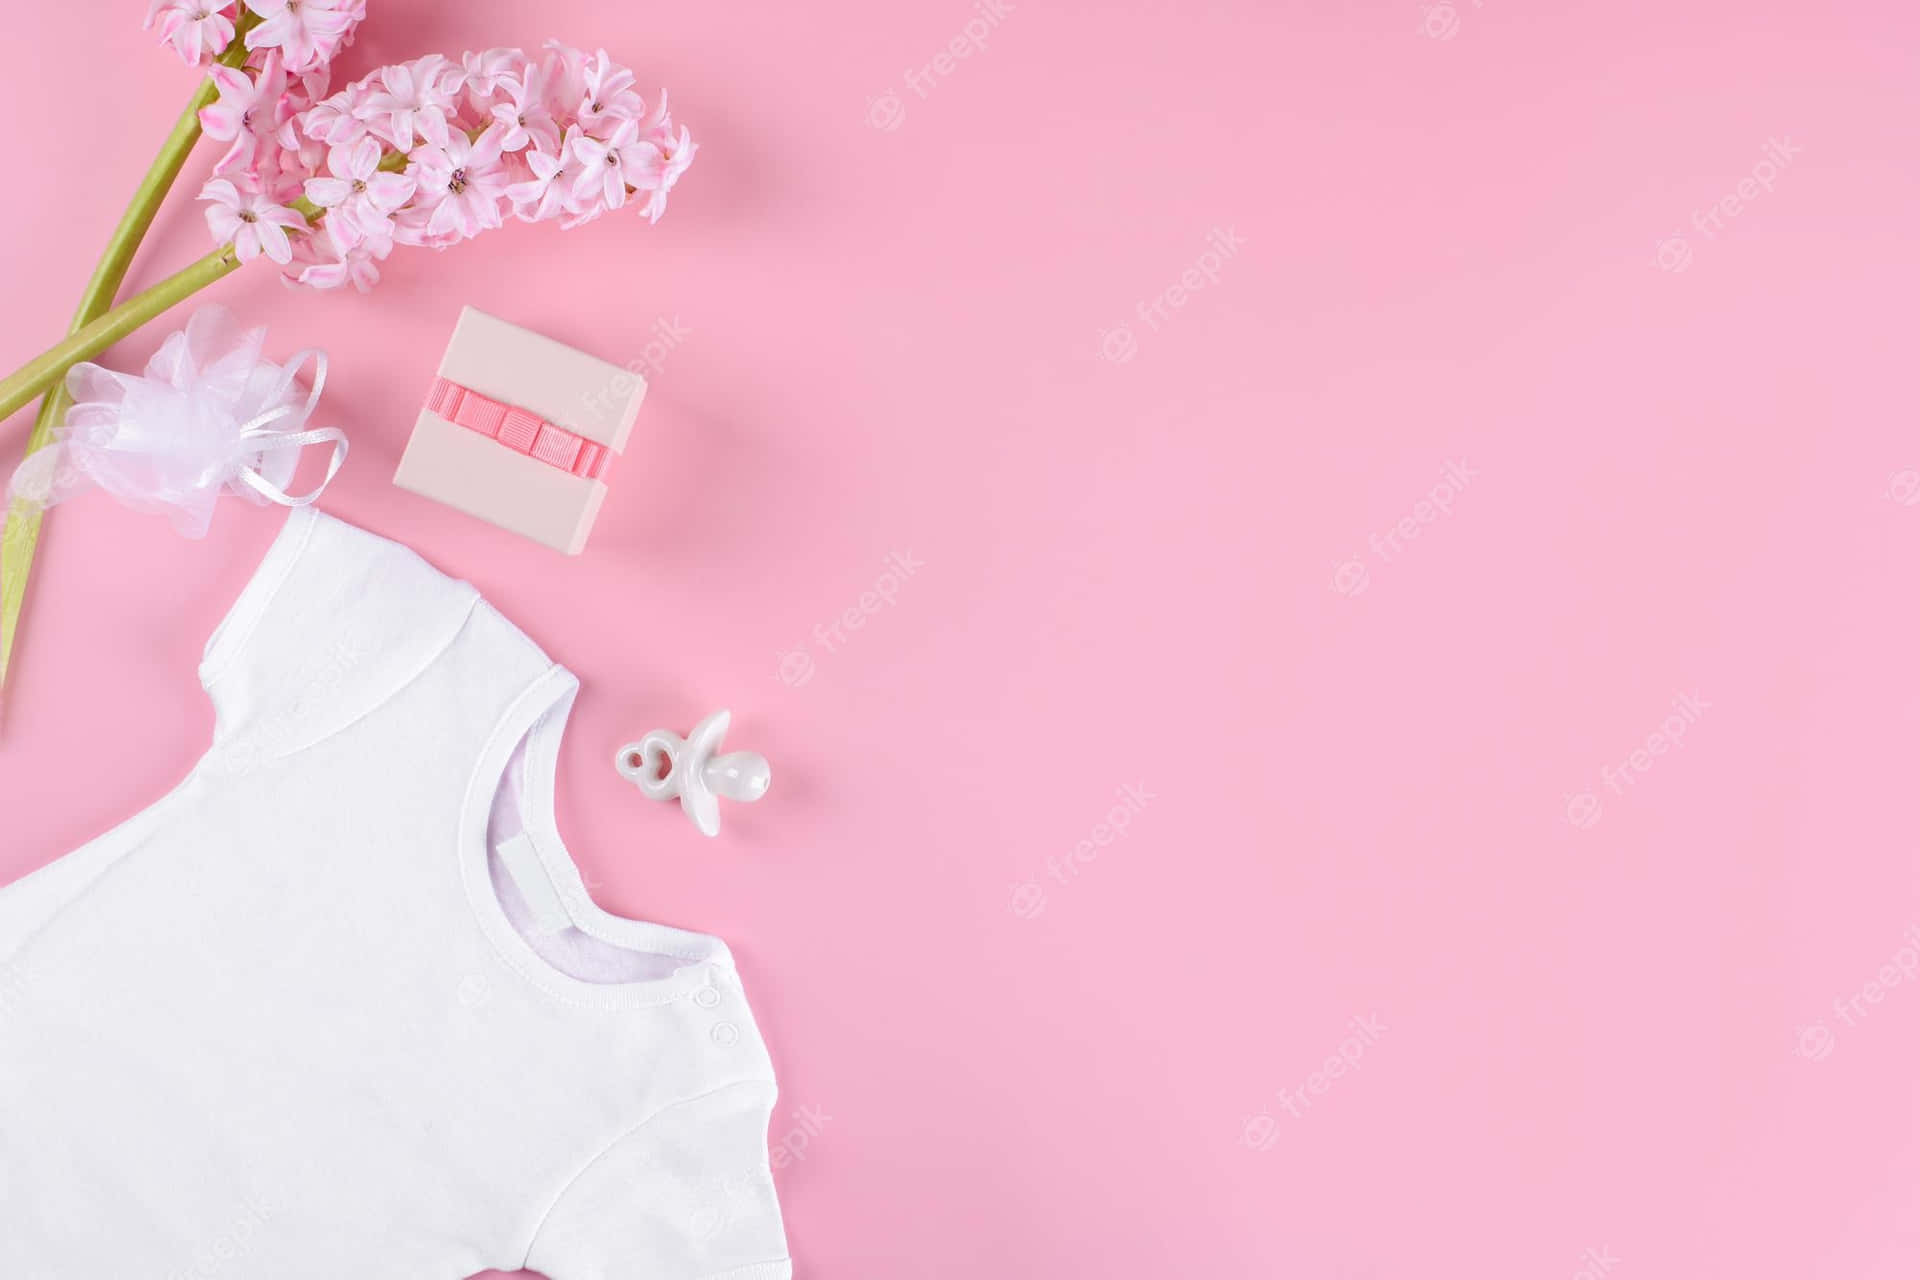 A White Baby Bodysuit On Pink Background With Flowers Wallpaper